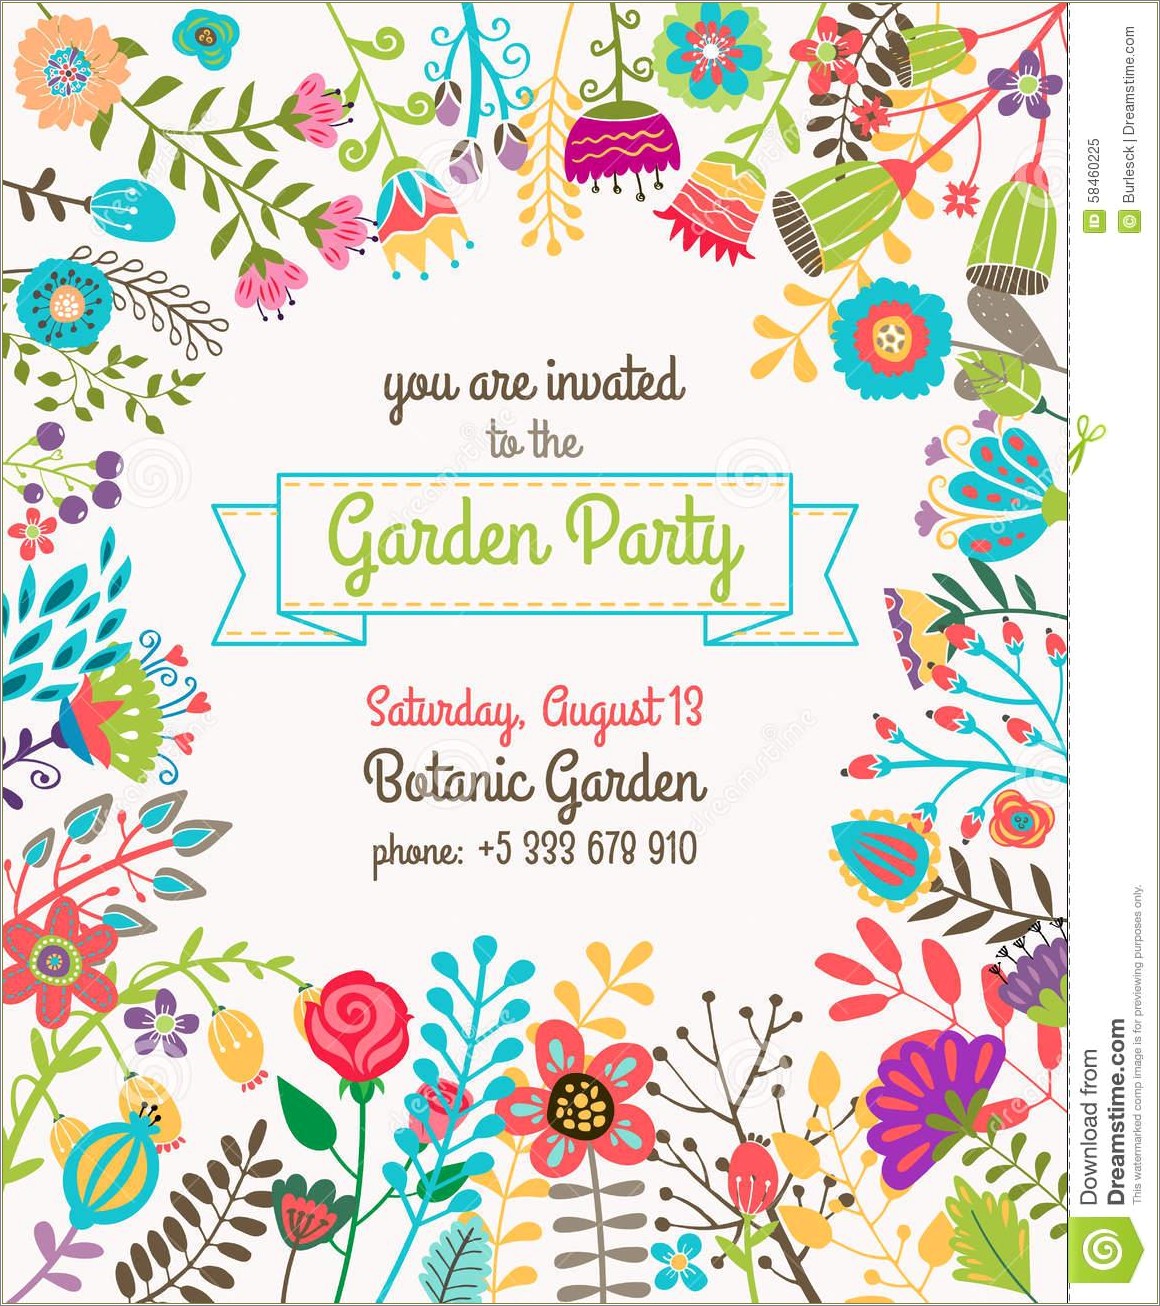 Download Party Invite Flyer Templates Free